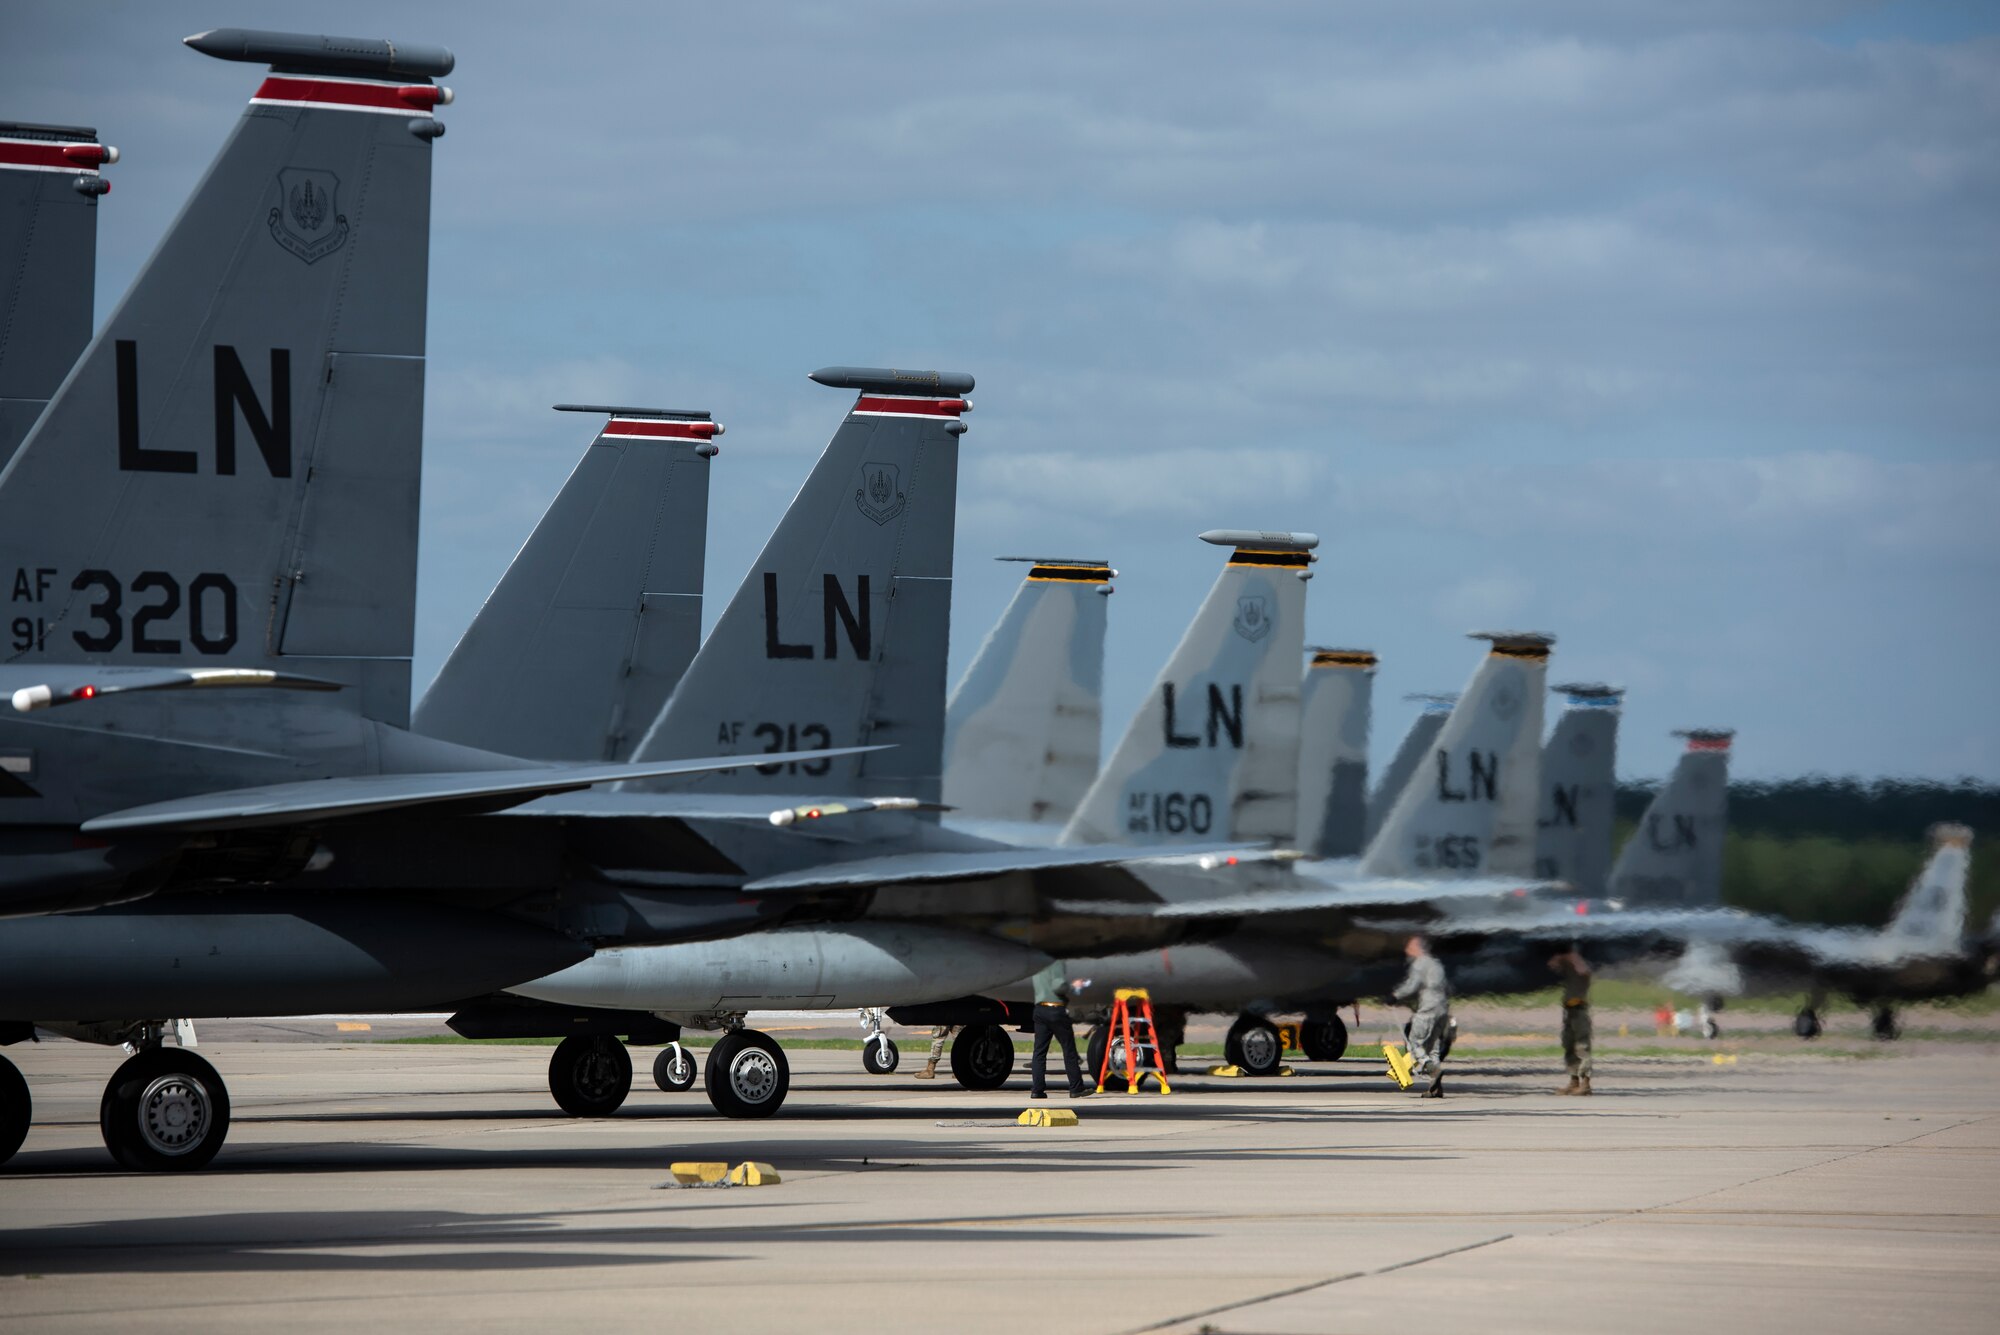 F-15E Strike Eagles and F-15C Eagles assigned to the 48th Fighter Wing line the taxiway prior to takeoffs in support of exercise Point Blank 20-4 at Royal Air Force Lakenheath, England, Sept. 10, 2020.  Exercises like Point Blank increase interoperability and collective readiness with other NATO forces, deter potential adversaries and ensure the skies above the European theater remain sovereign. (U.S. Air Force photo by Airman 1st Class Jessi Monte)